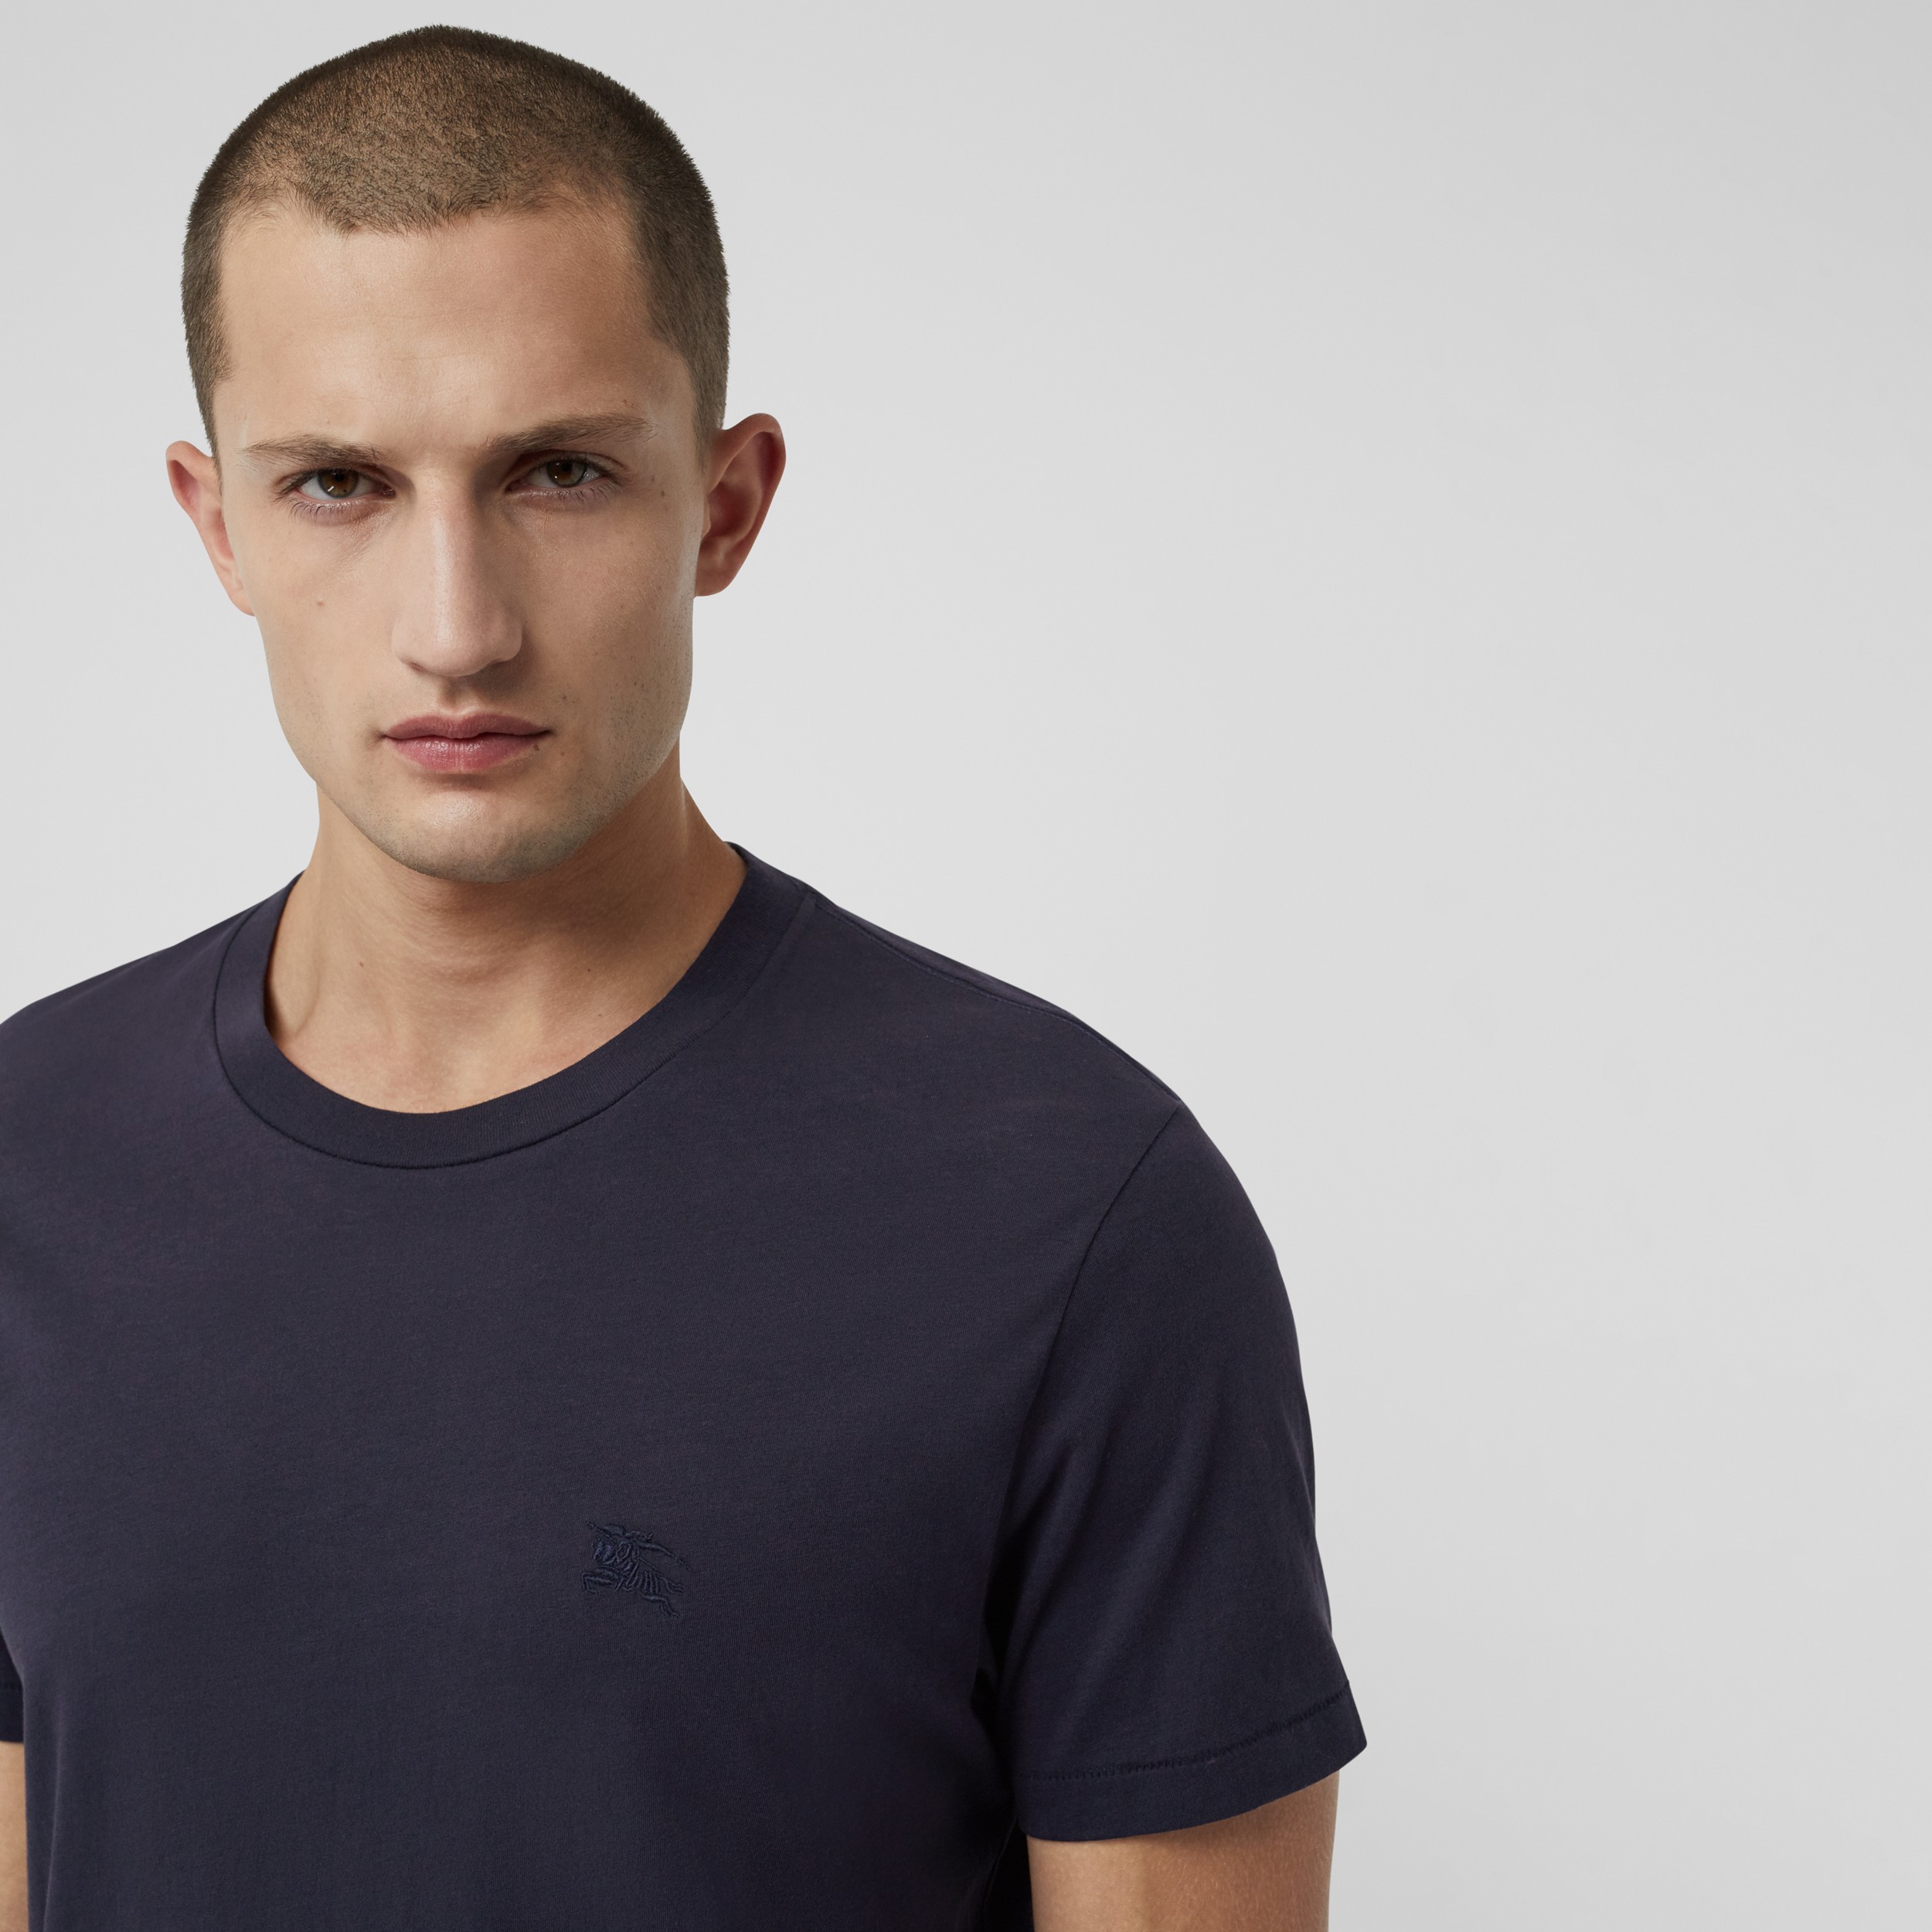 Cotton Jersey T-shirt in Navy - Men | Burberry United States